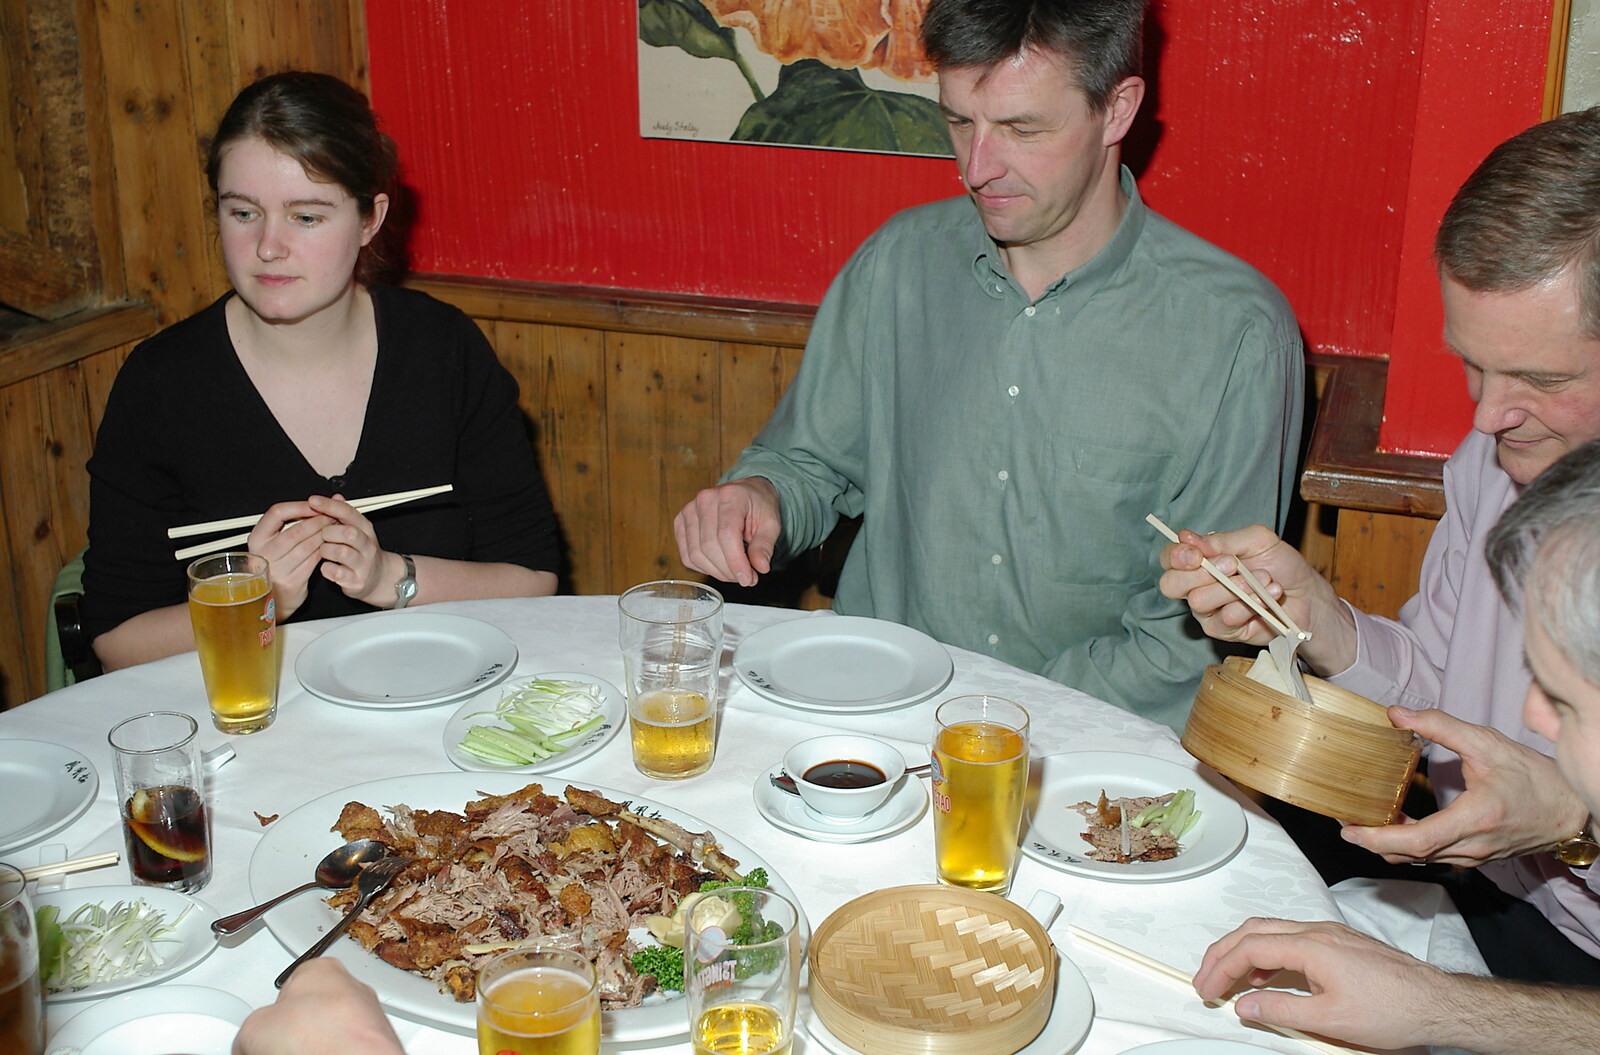 A Walk Around Lymington, and Luke Leaves Qualcomm Cambridge - 13th March 2005: Isobel gets ready with chopsticks